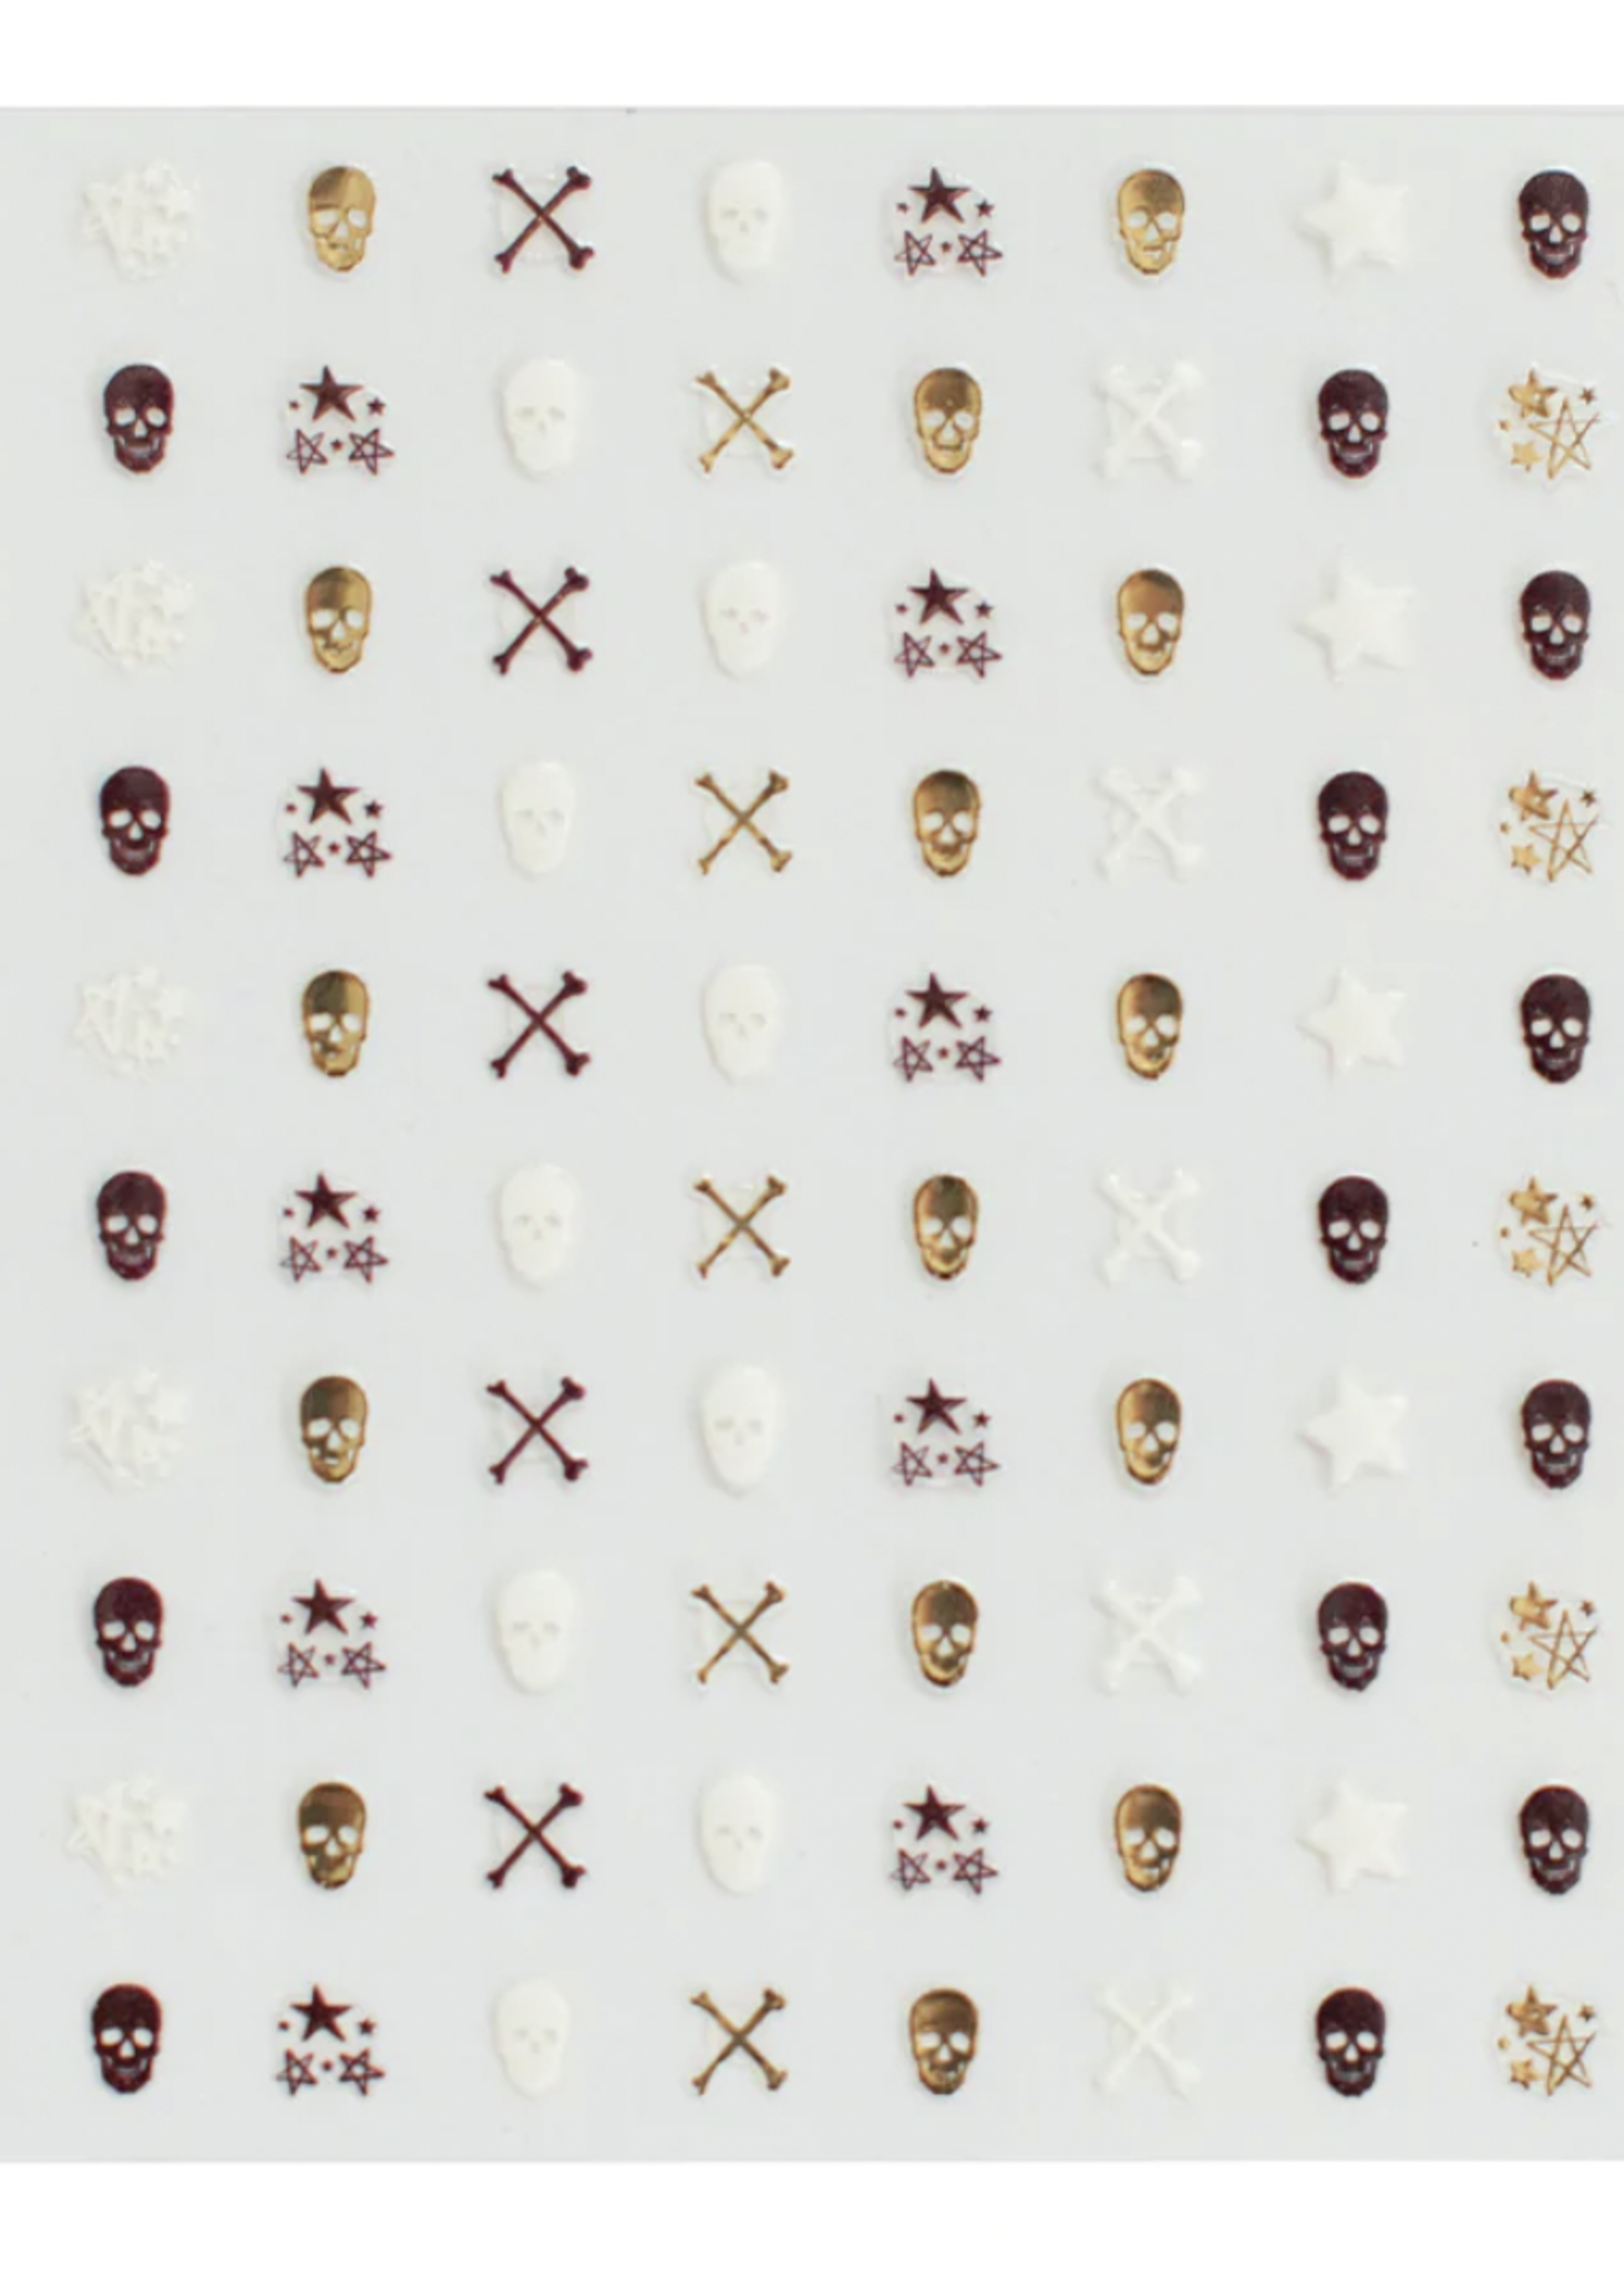 Creative Twist Events GOLD SKULL NAIL STICKERS